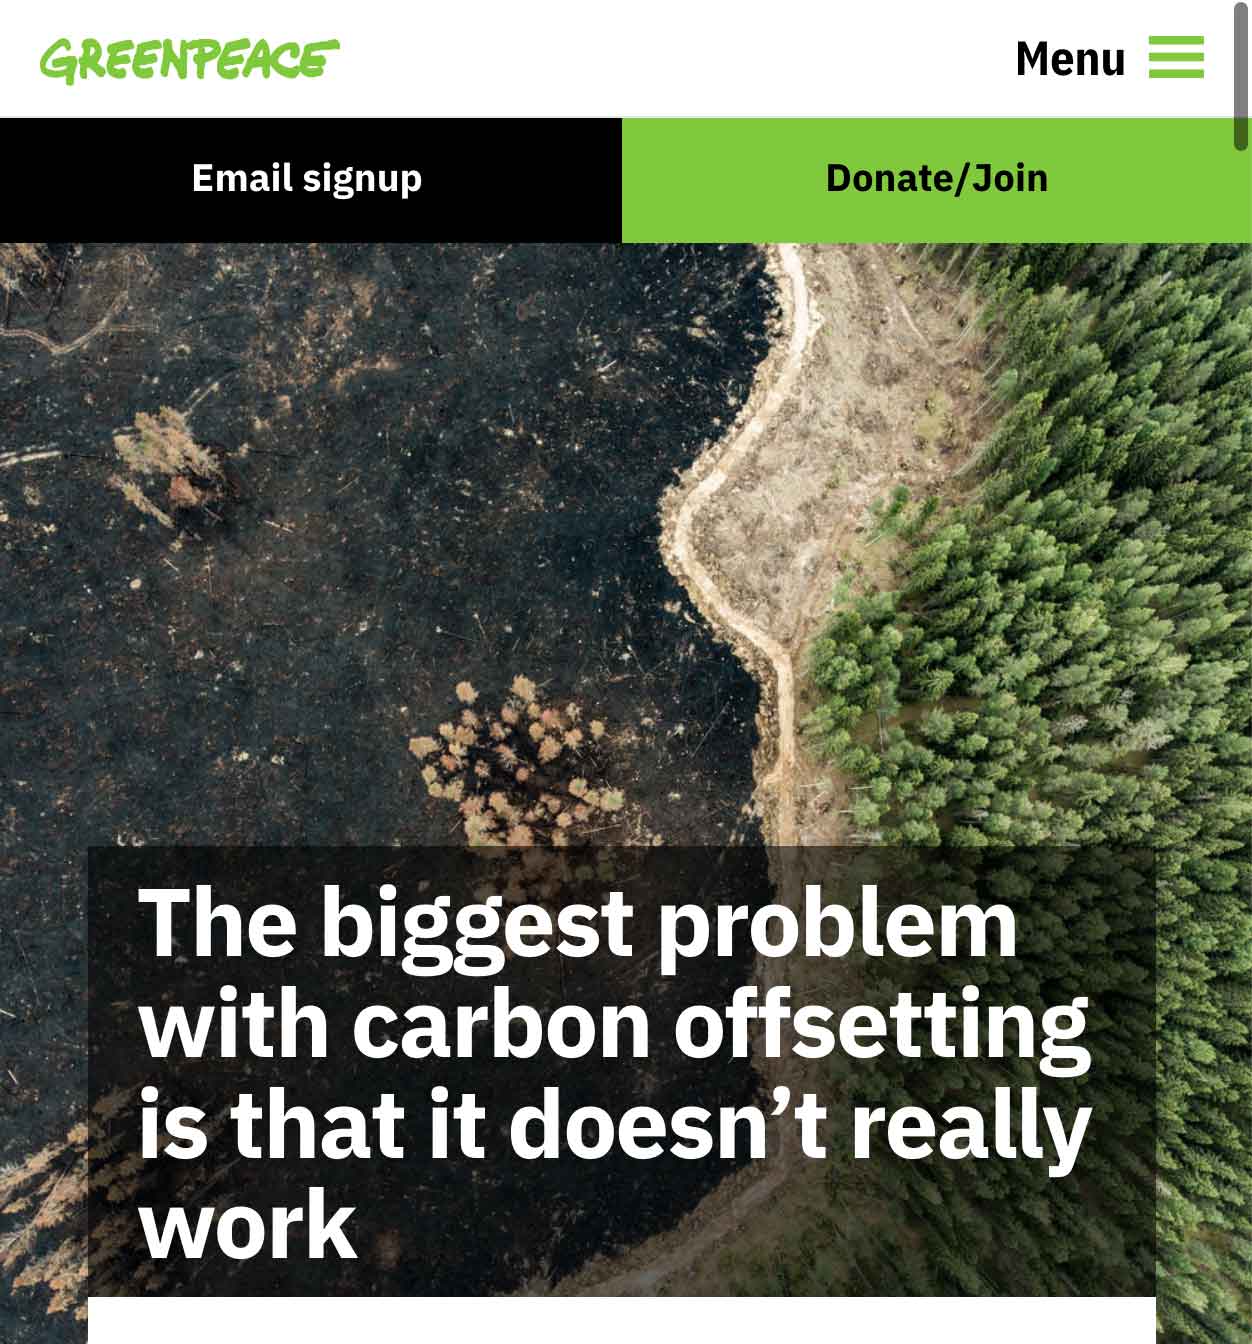 Greenpeace: the biggest problem with carbon offsets is that they don't work